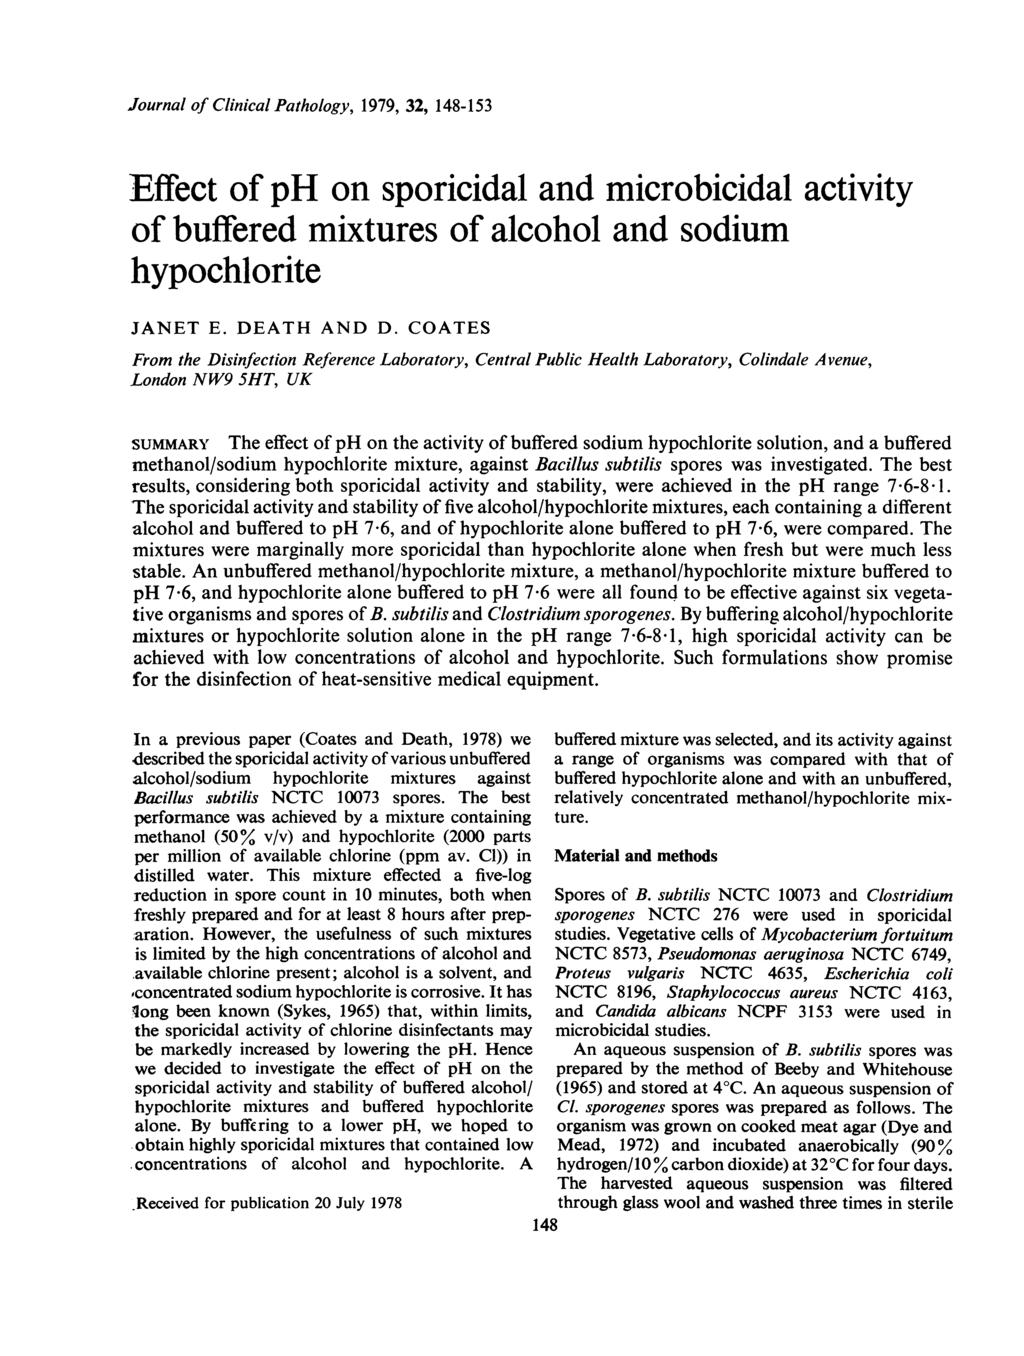 Journal of Clinical Pathology, 1979, 32, 148-153 Effect of on sporicidal and microbicidal activity of buffered mixtures of alcohol and sodium hypochlorite JANET E. DEATH AND D.